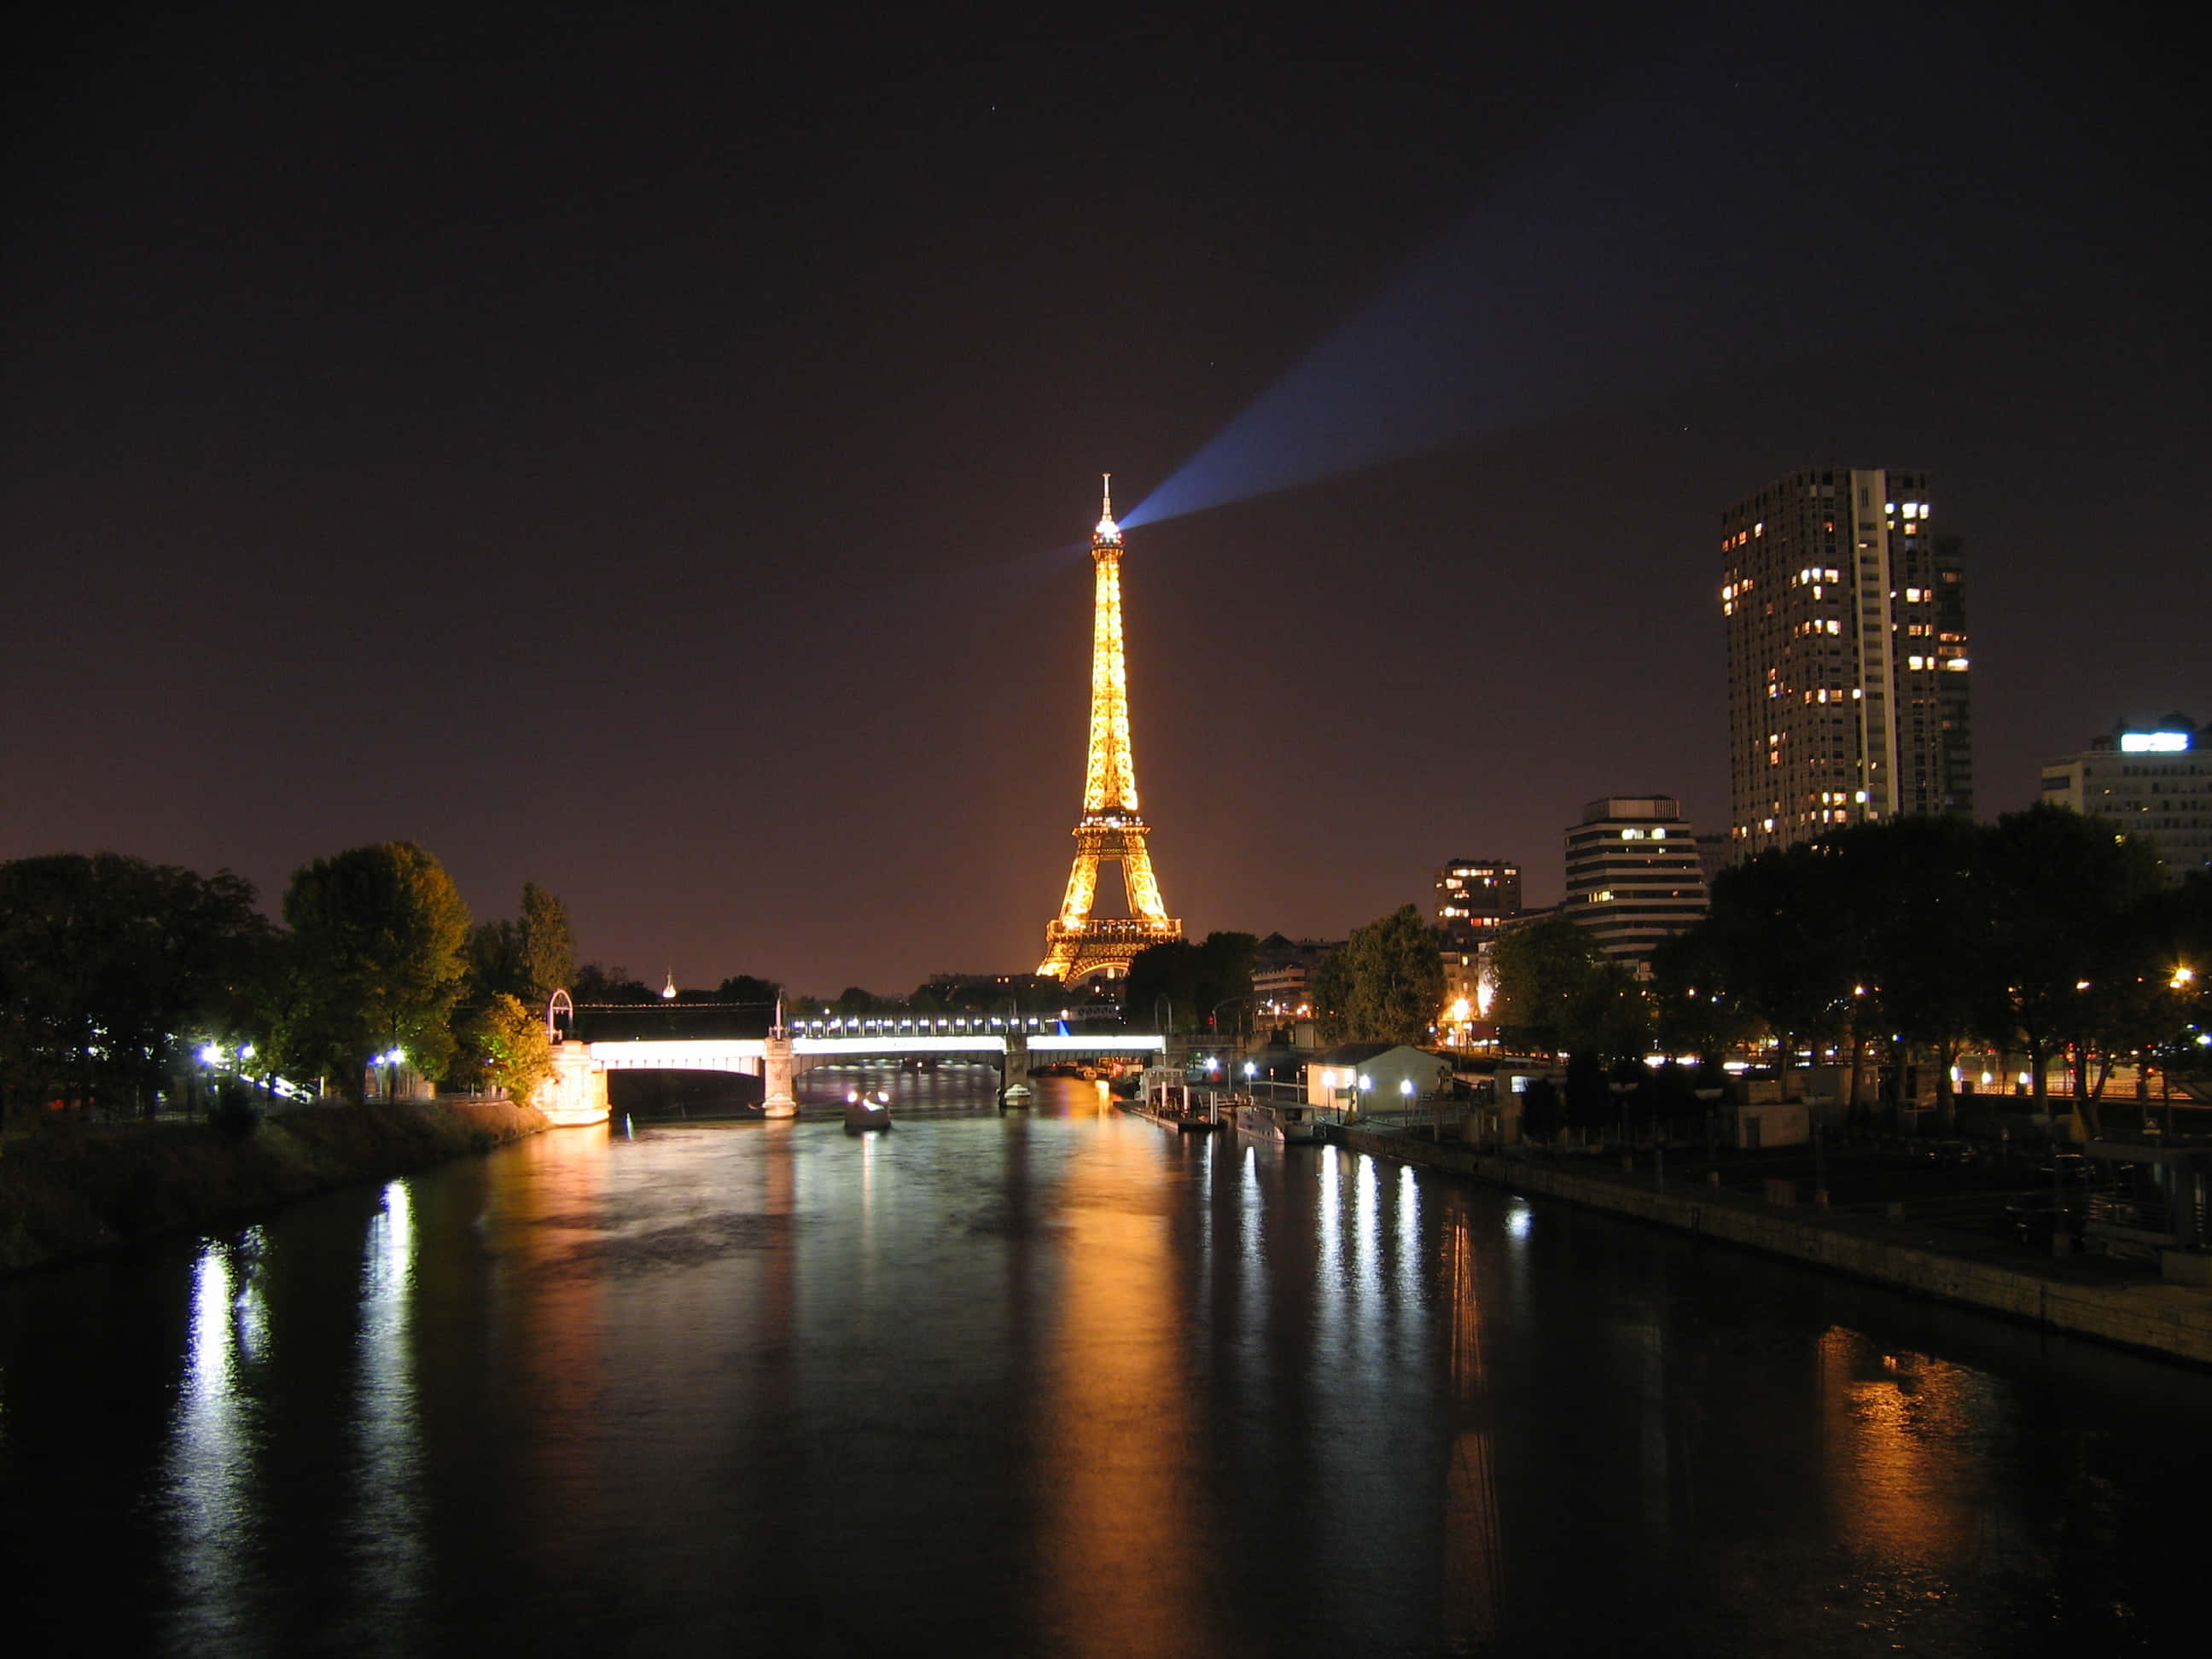 Image  View of Paris, France, with the Eiffel Tower lit up at night